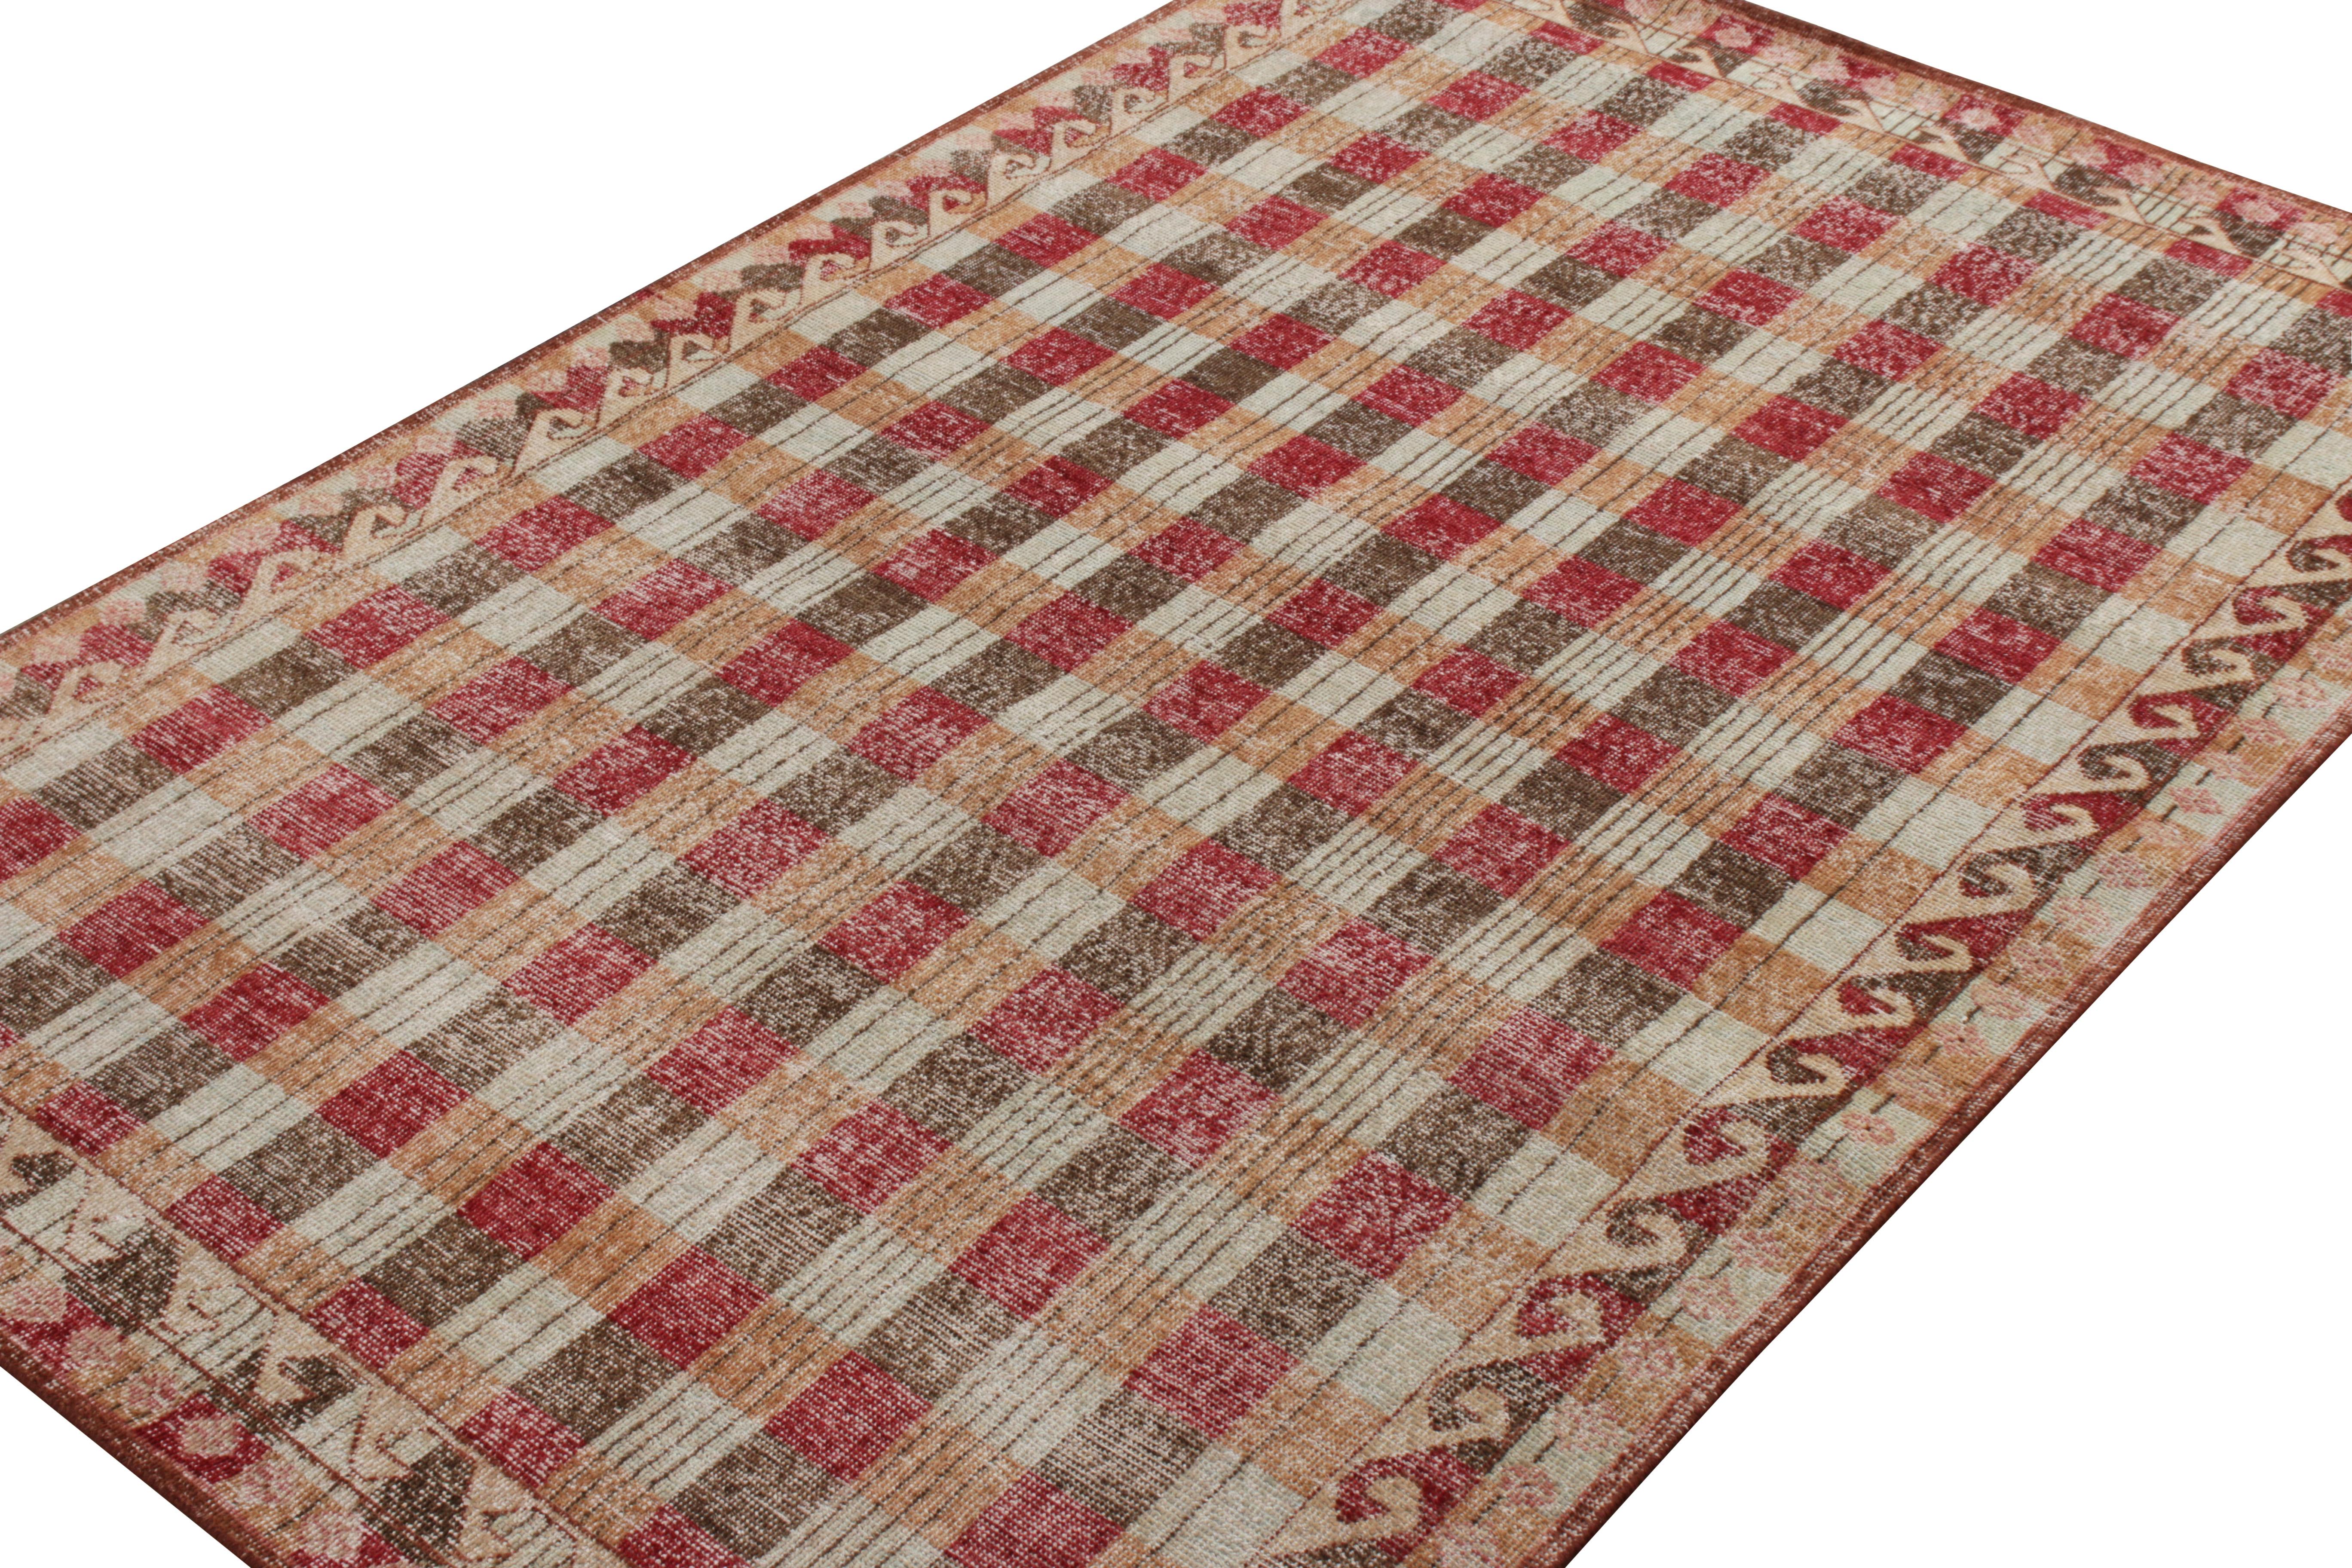 Other Rug & Kilim’s Distressed Classic Style Rug in Beige-Brown, Red Geometric Pattern For Sale